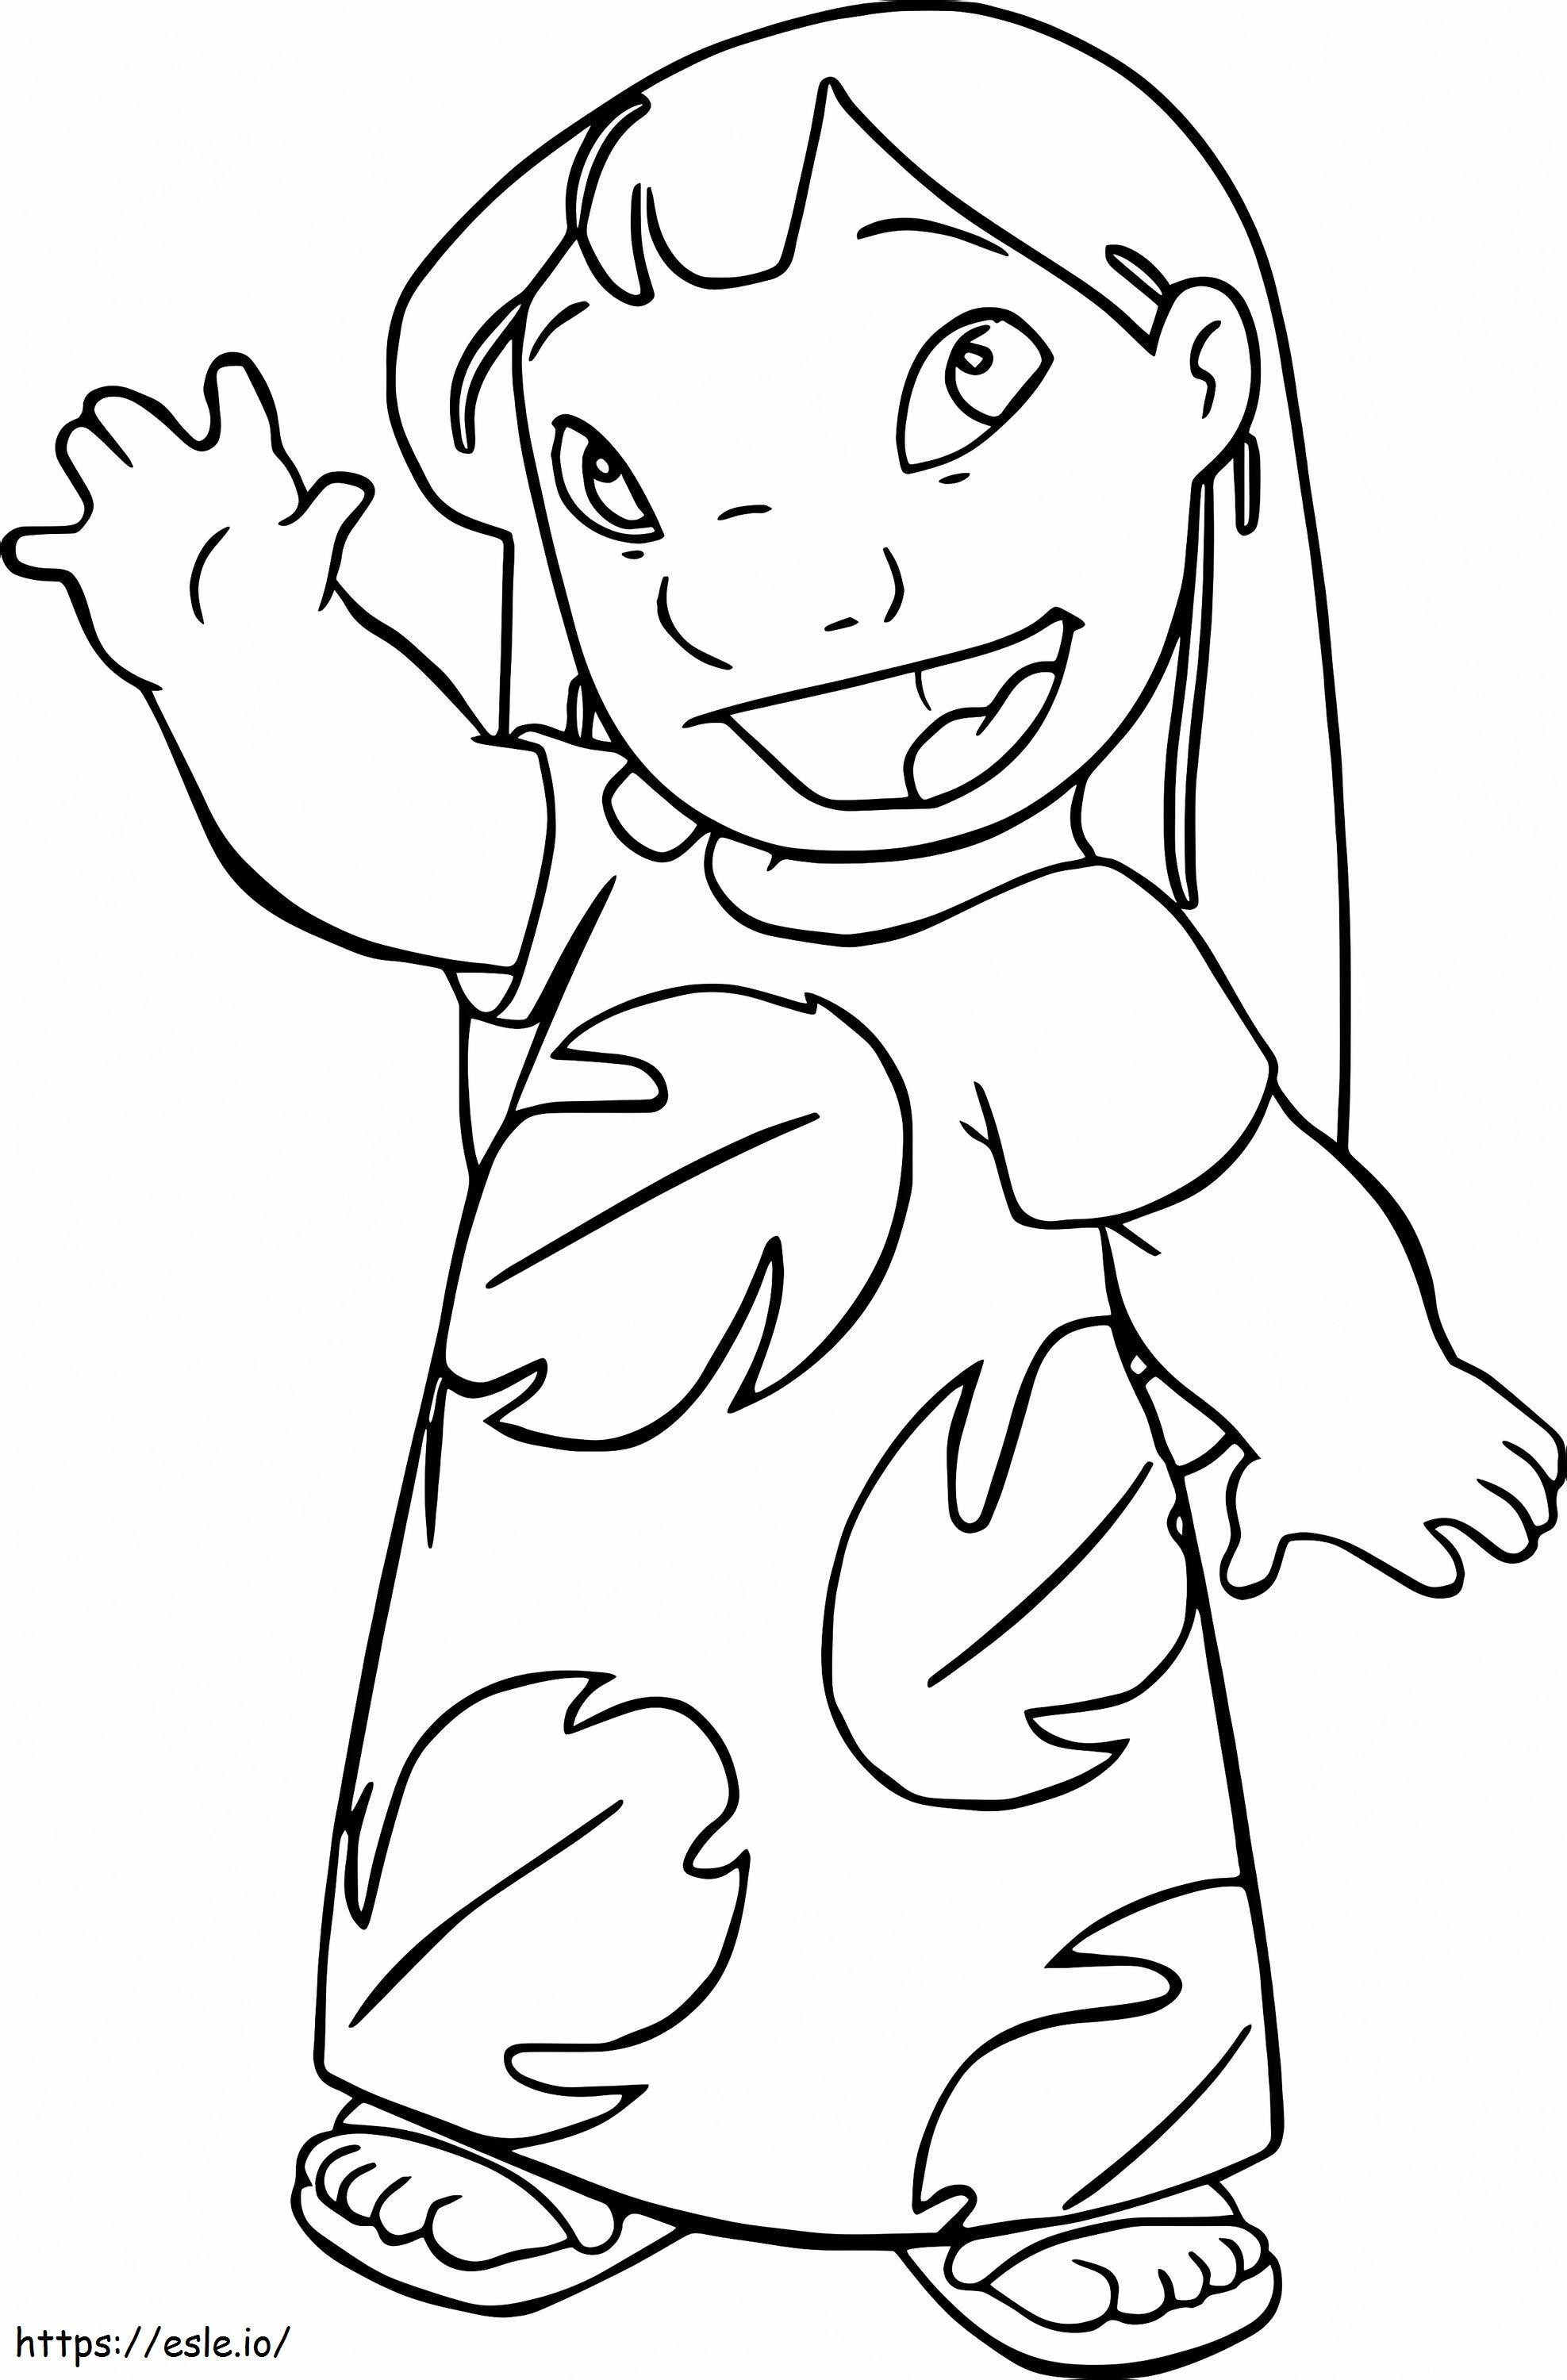 Lilo And Stitch Colouring In Pages 674X1024 1 coloring page